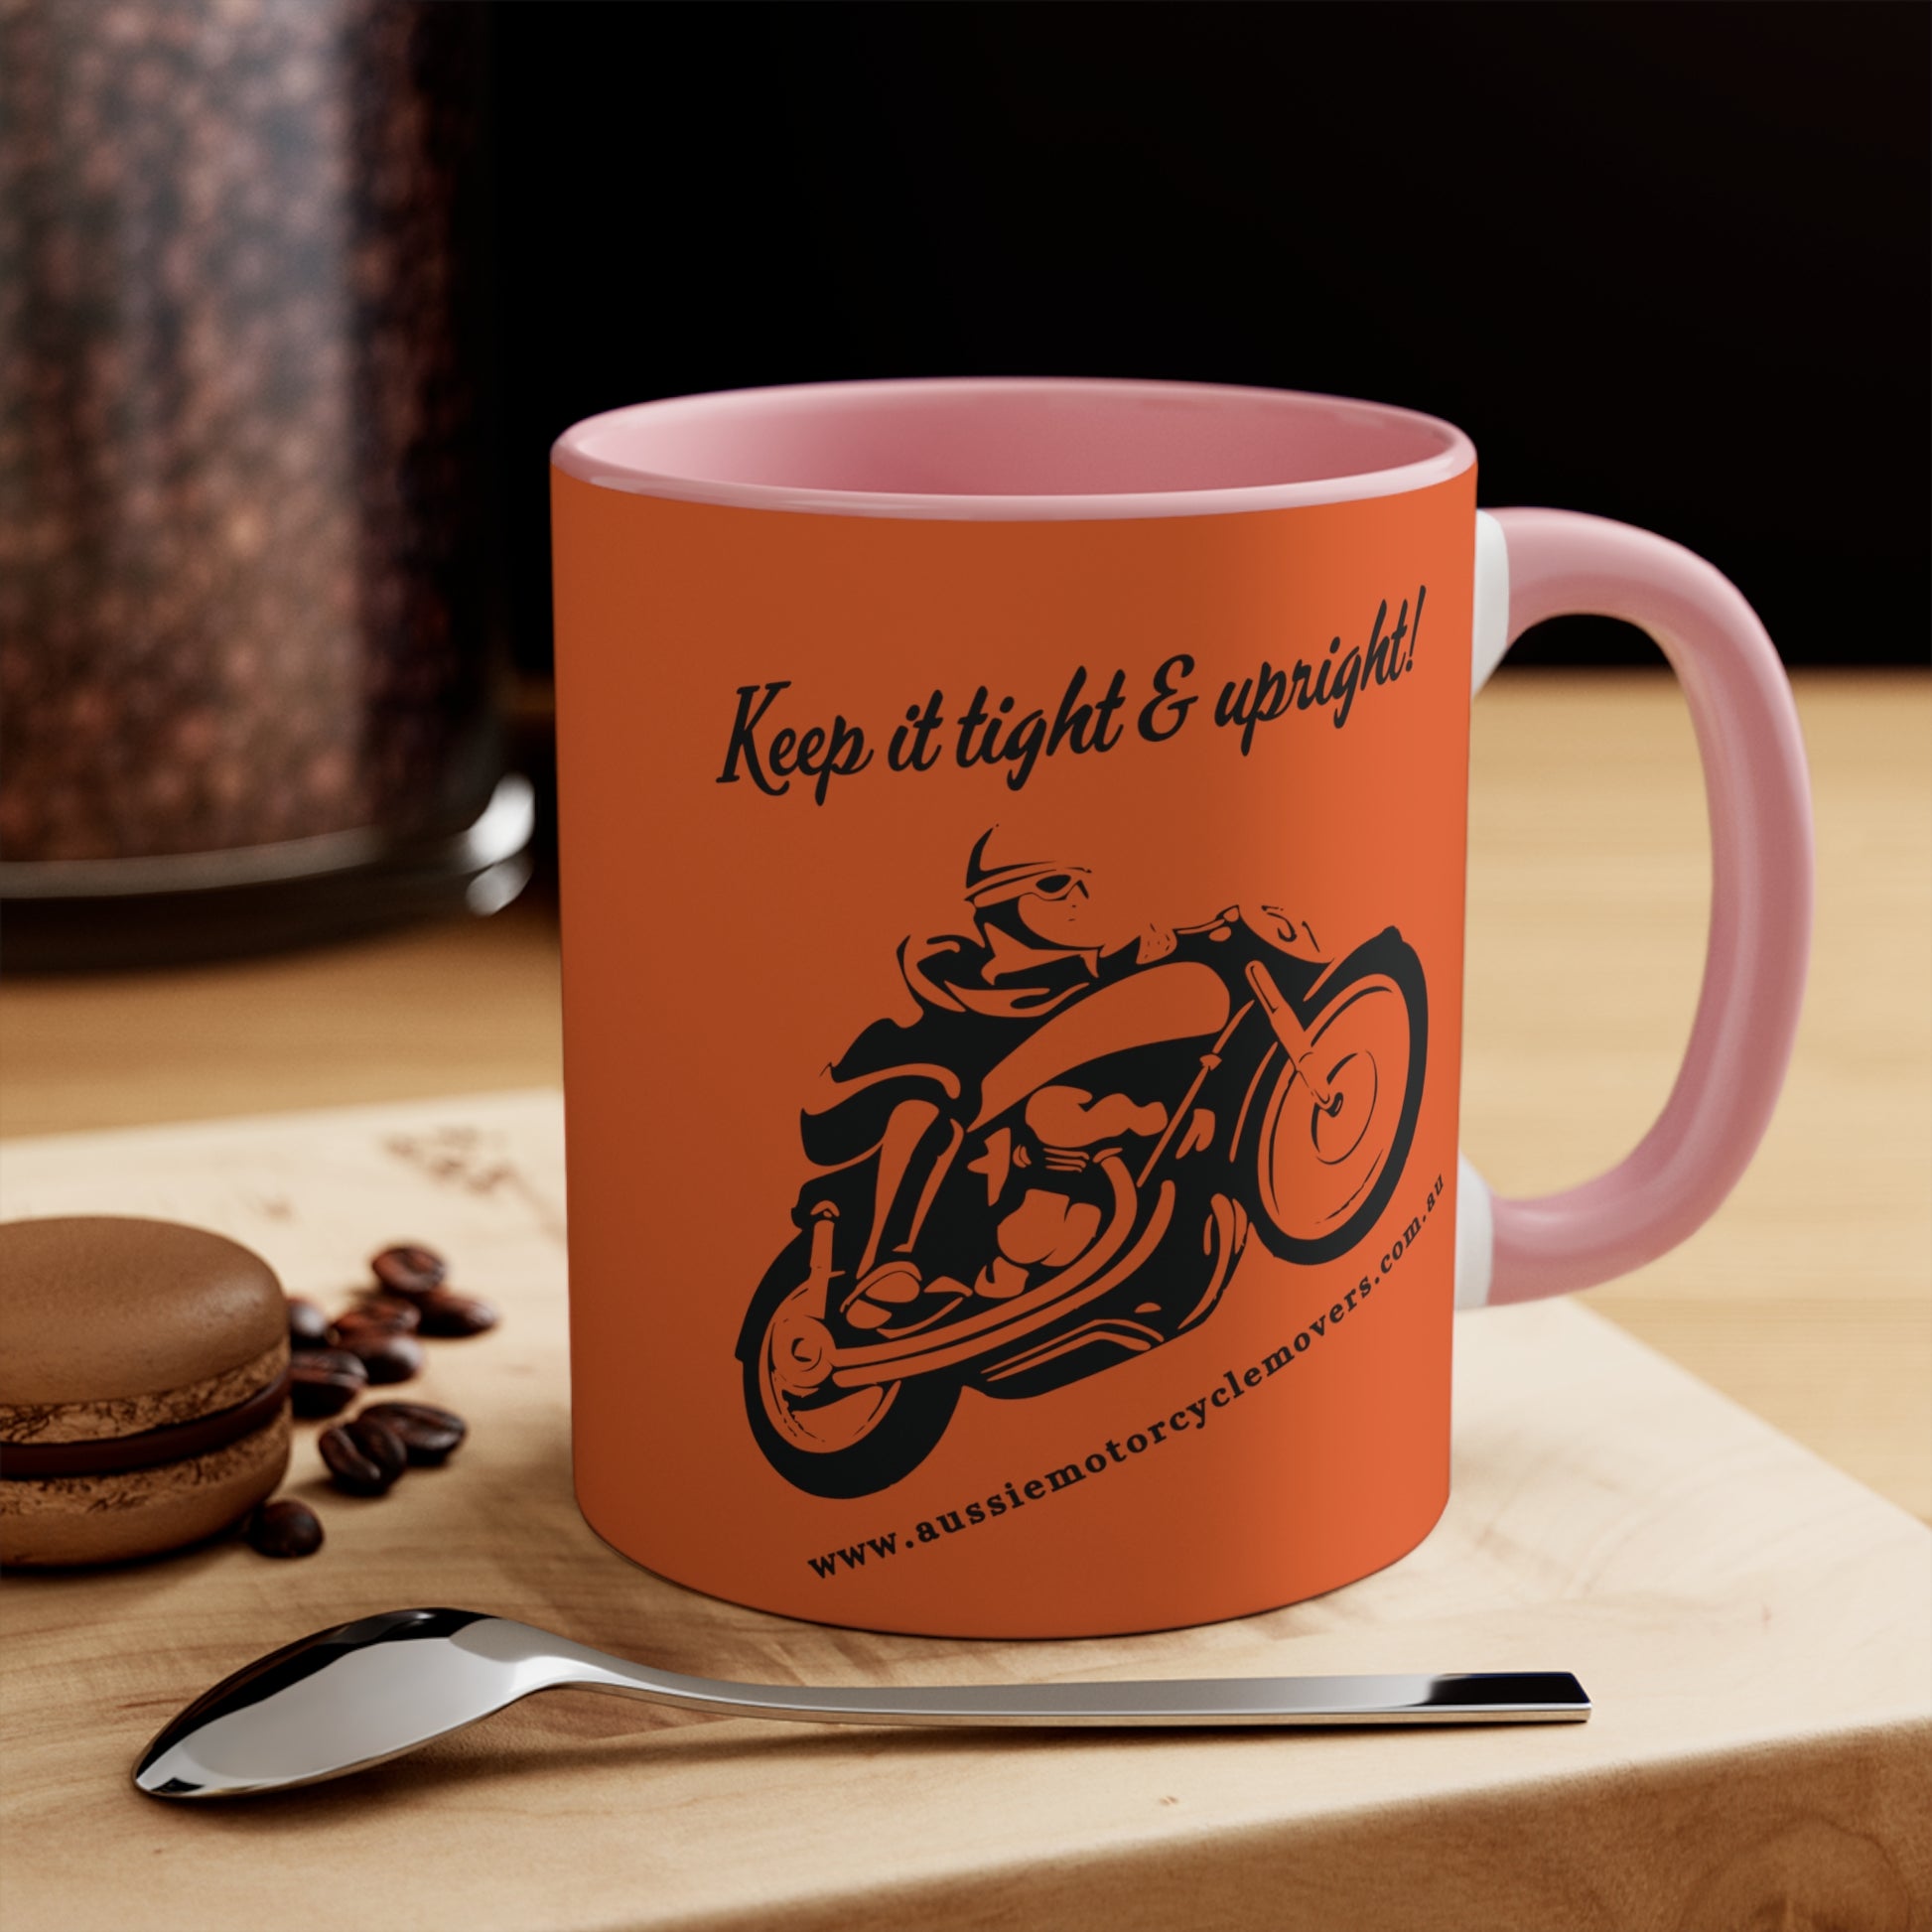 Aussie Motorcycle Movers Supporter Colorful Accent Mugs, 11oz, Mick Train legendary saying mug Mug 11oz Pink 